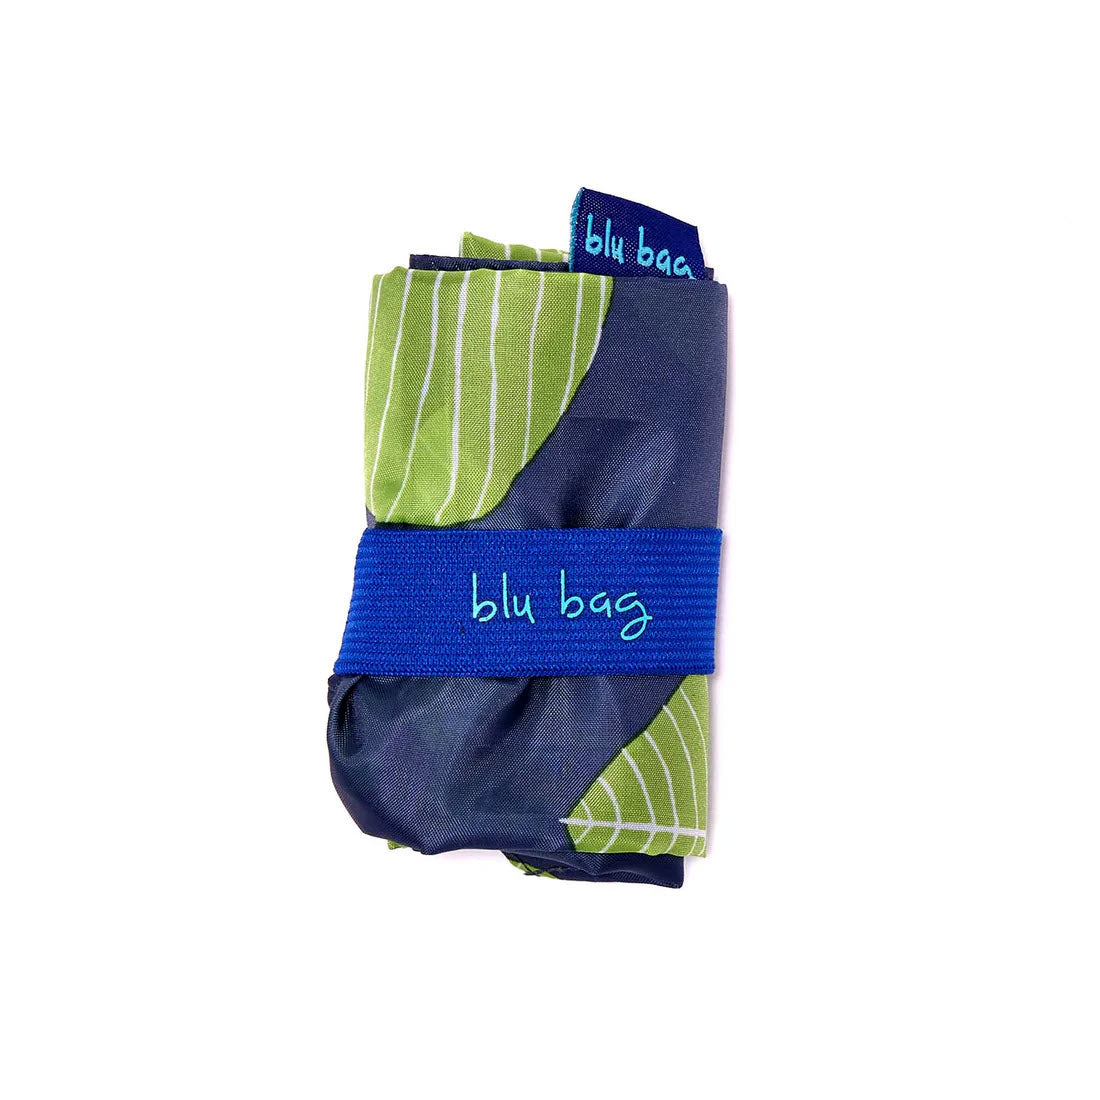 A folded eco-friendly tote with blue and green striped pattern, labeled with &quot;BLU BAG ASPEN LEAVES&quot; on a blue band by Rockflowerpaper.